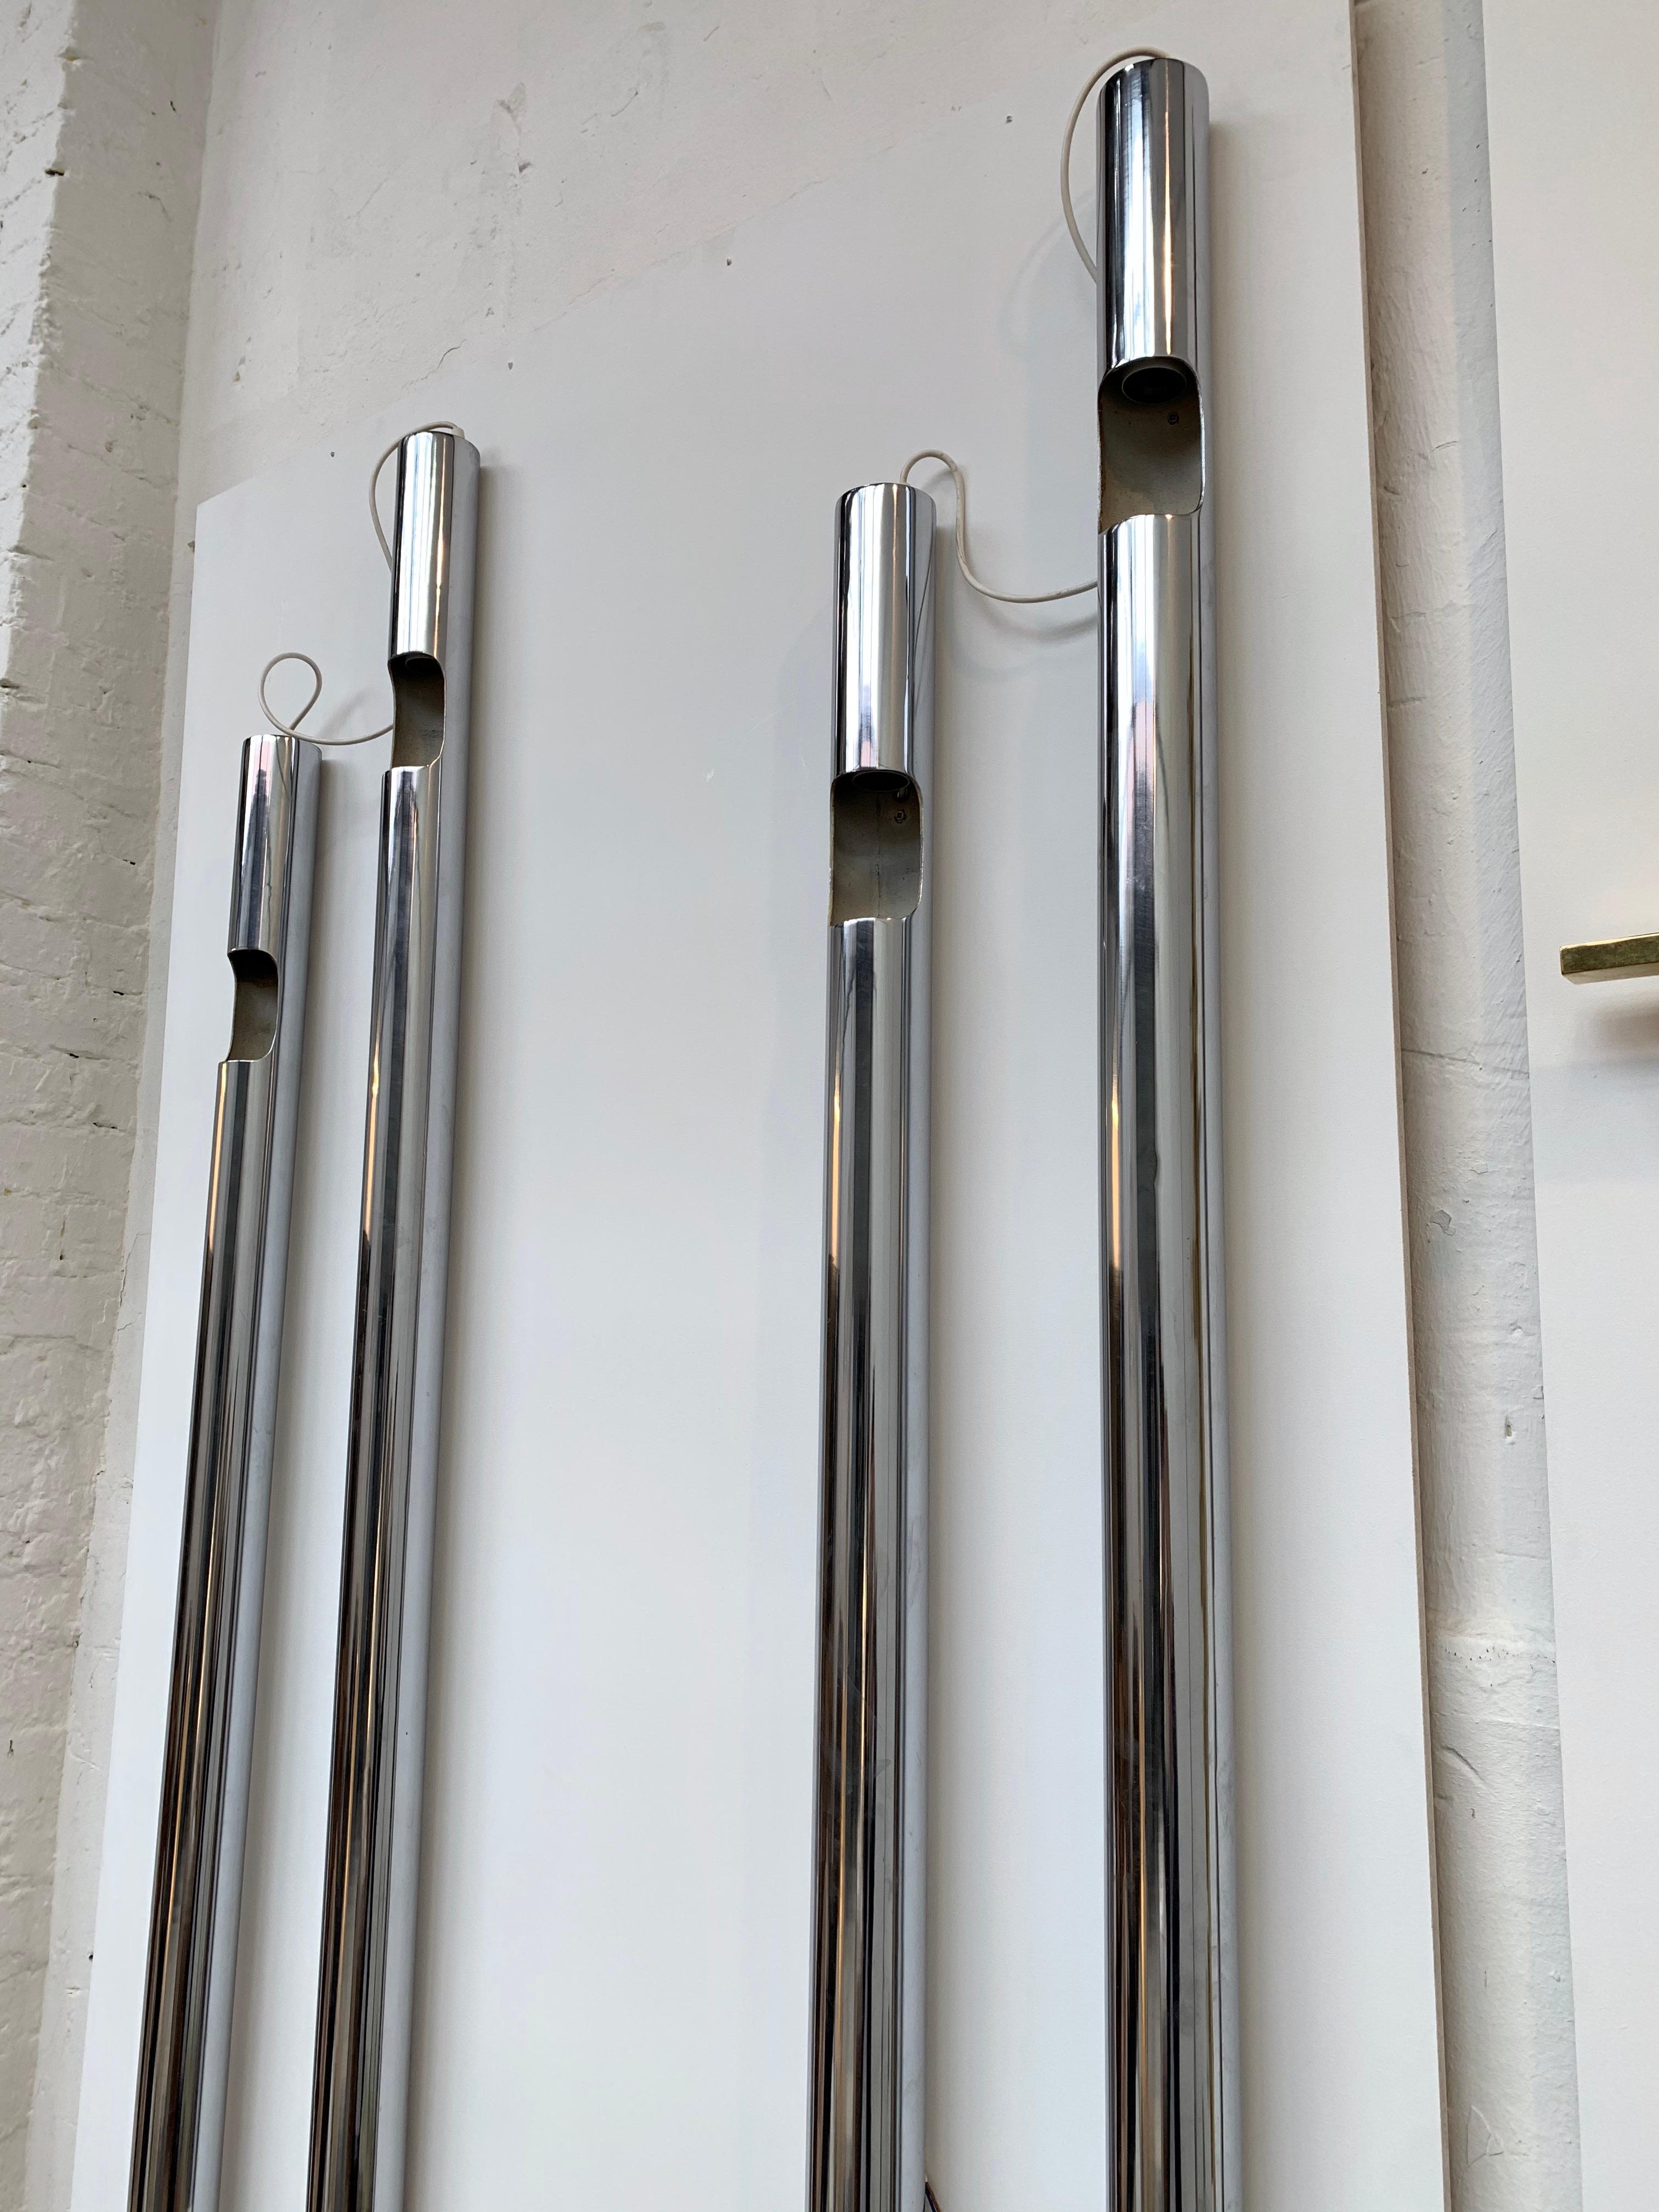 Large pair of wall lights lamps sconces organs in metal chrome by Reggiani. Famous design as Sciolari, Willy Rizzo, Maison Charles, Jansen.

Measurements on photos: H 175 x W 29 x D 7 centimeters.